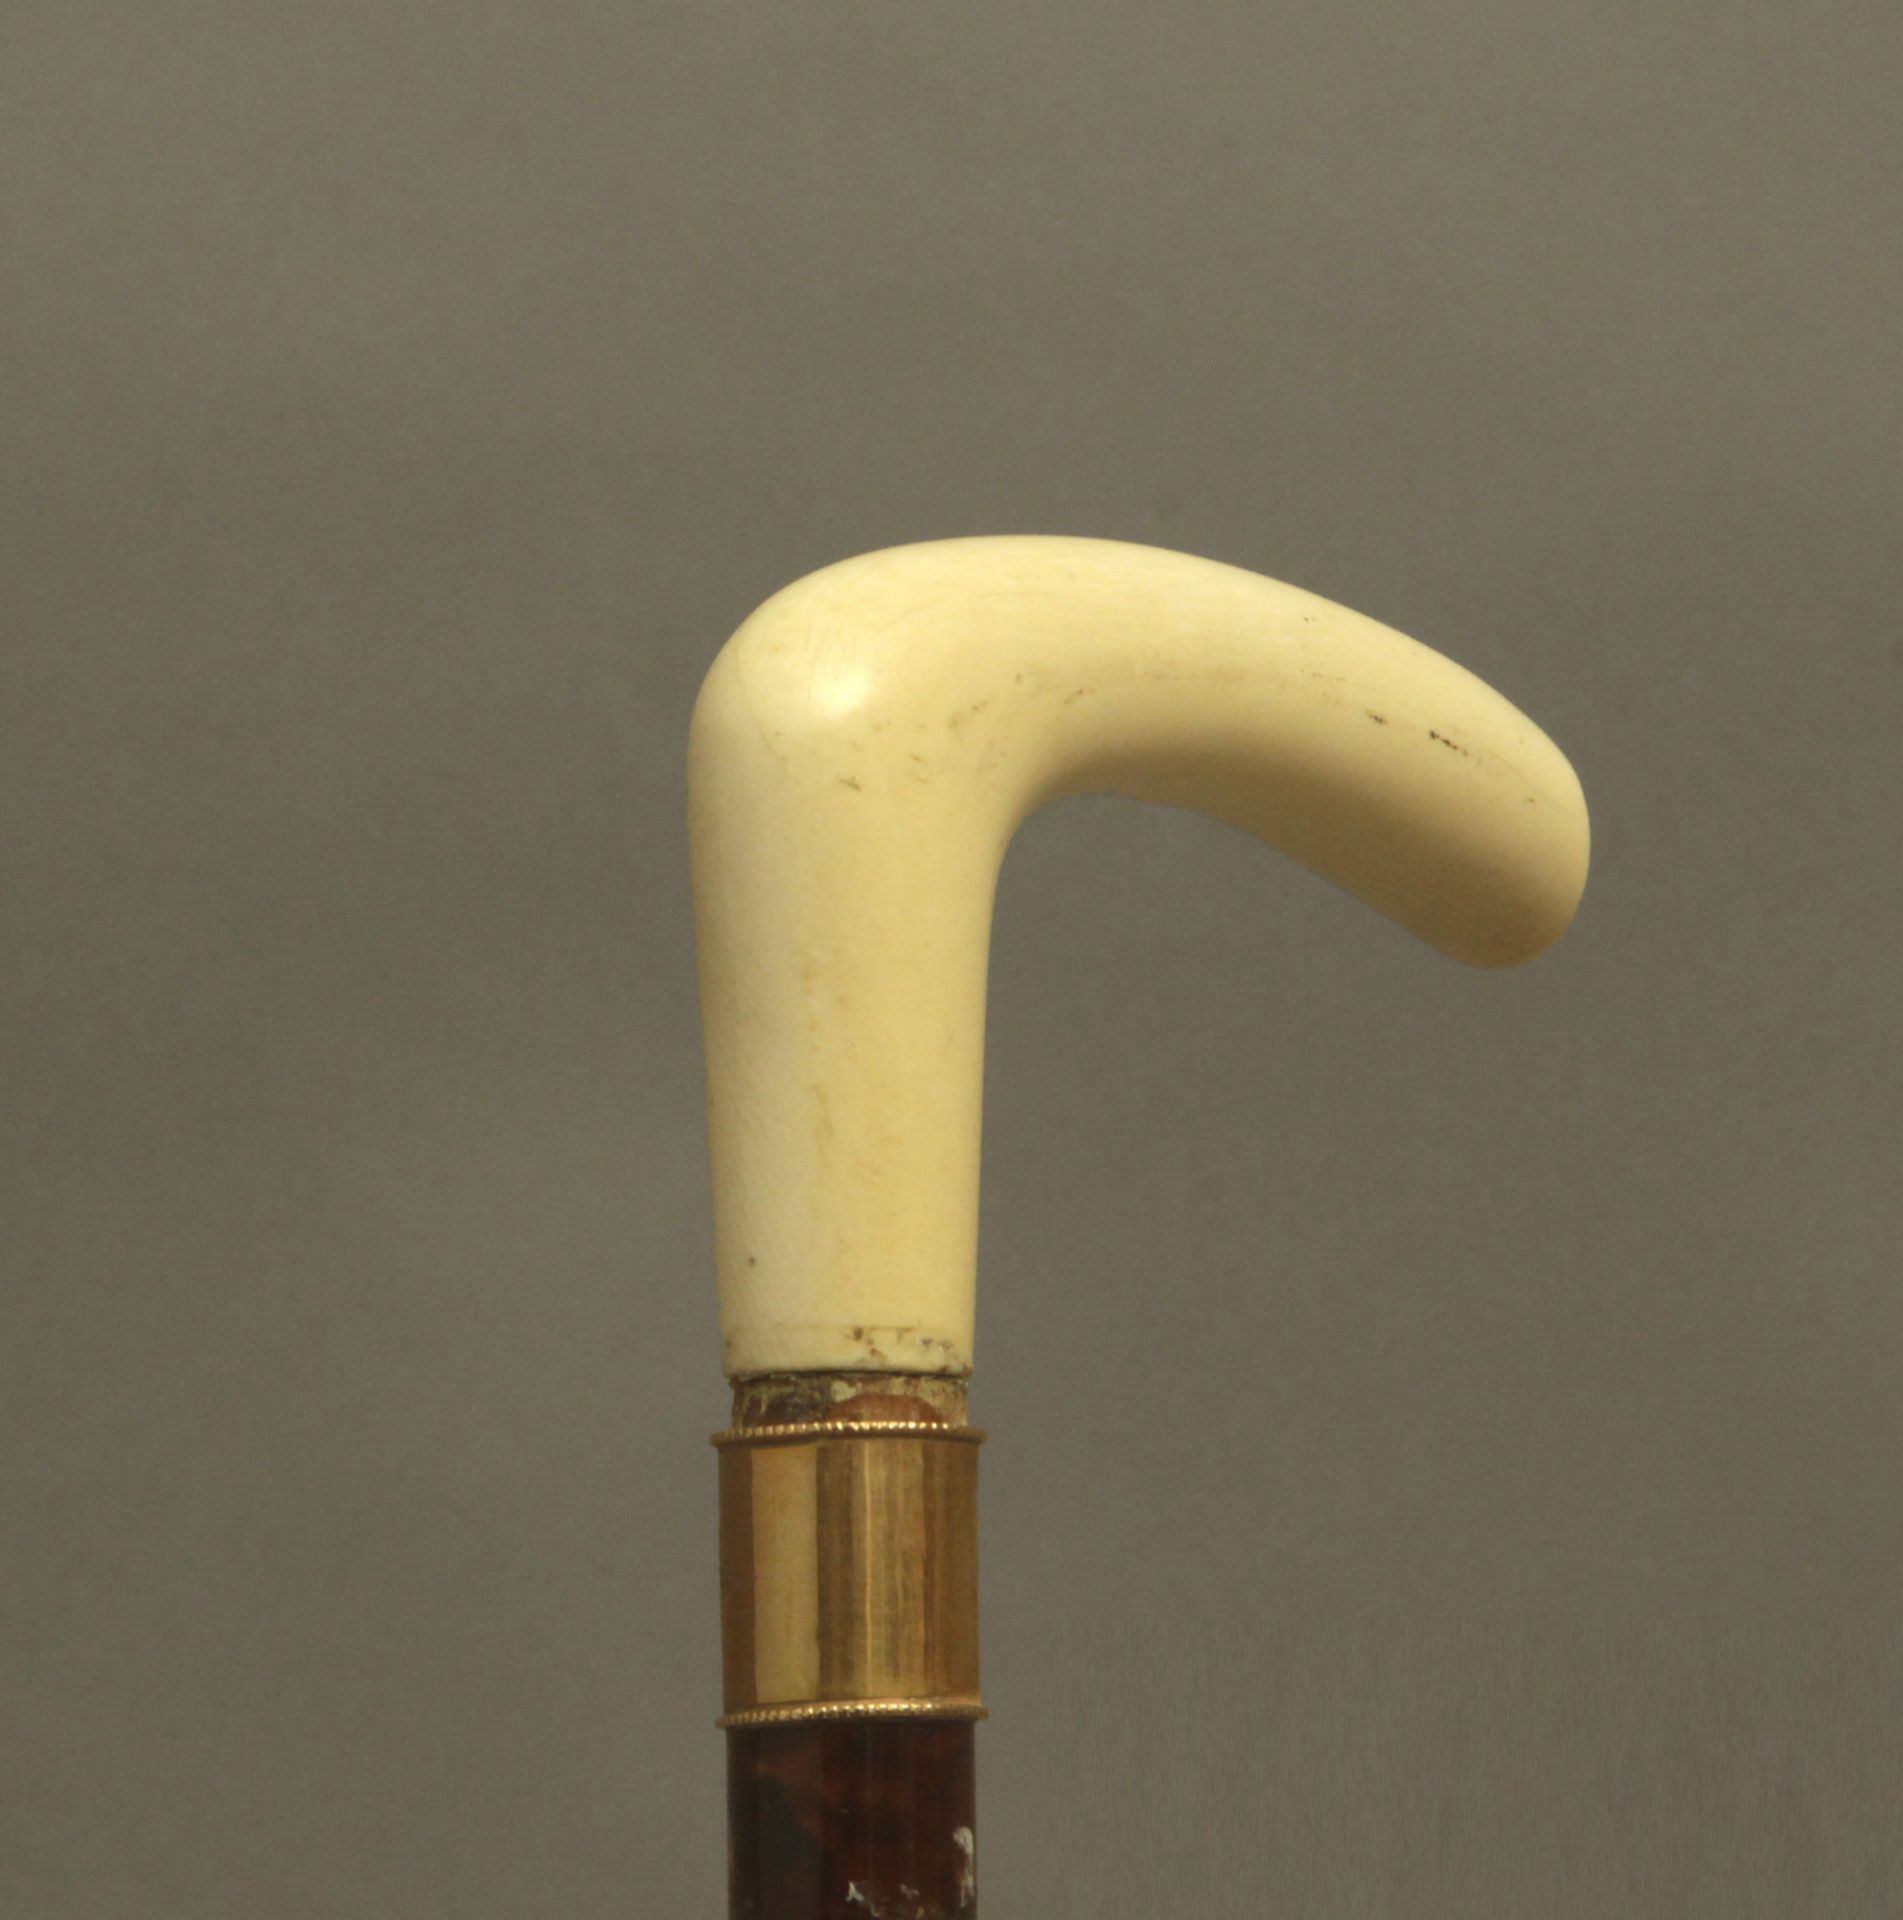 A first half of 20th century ivory handled dress cane - Image 5 of 6